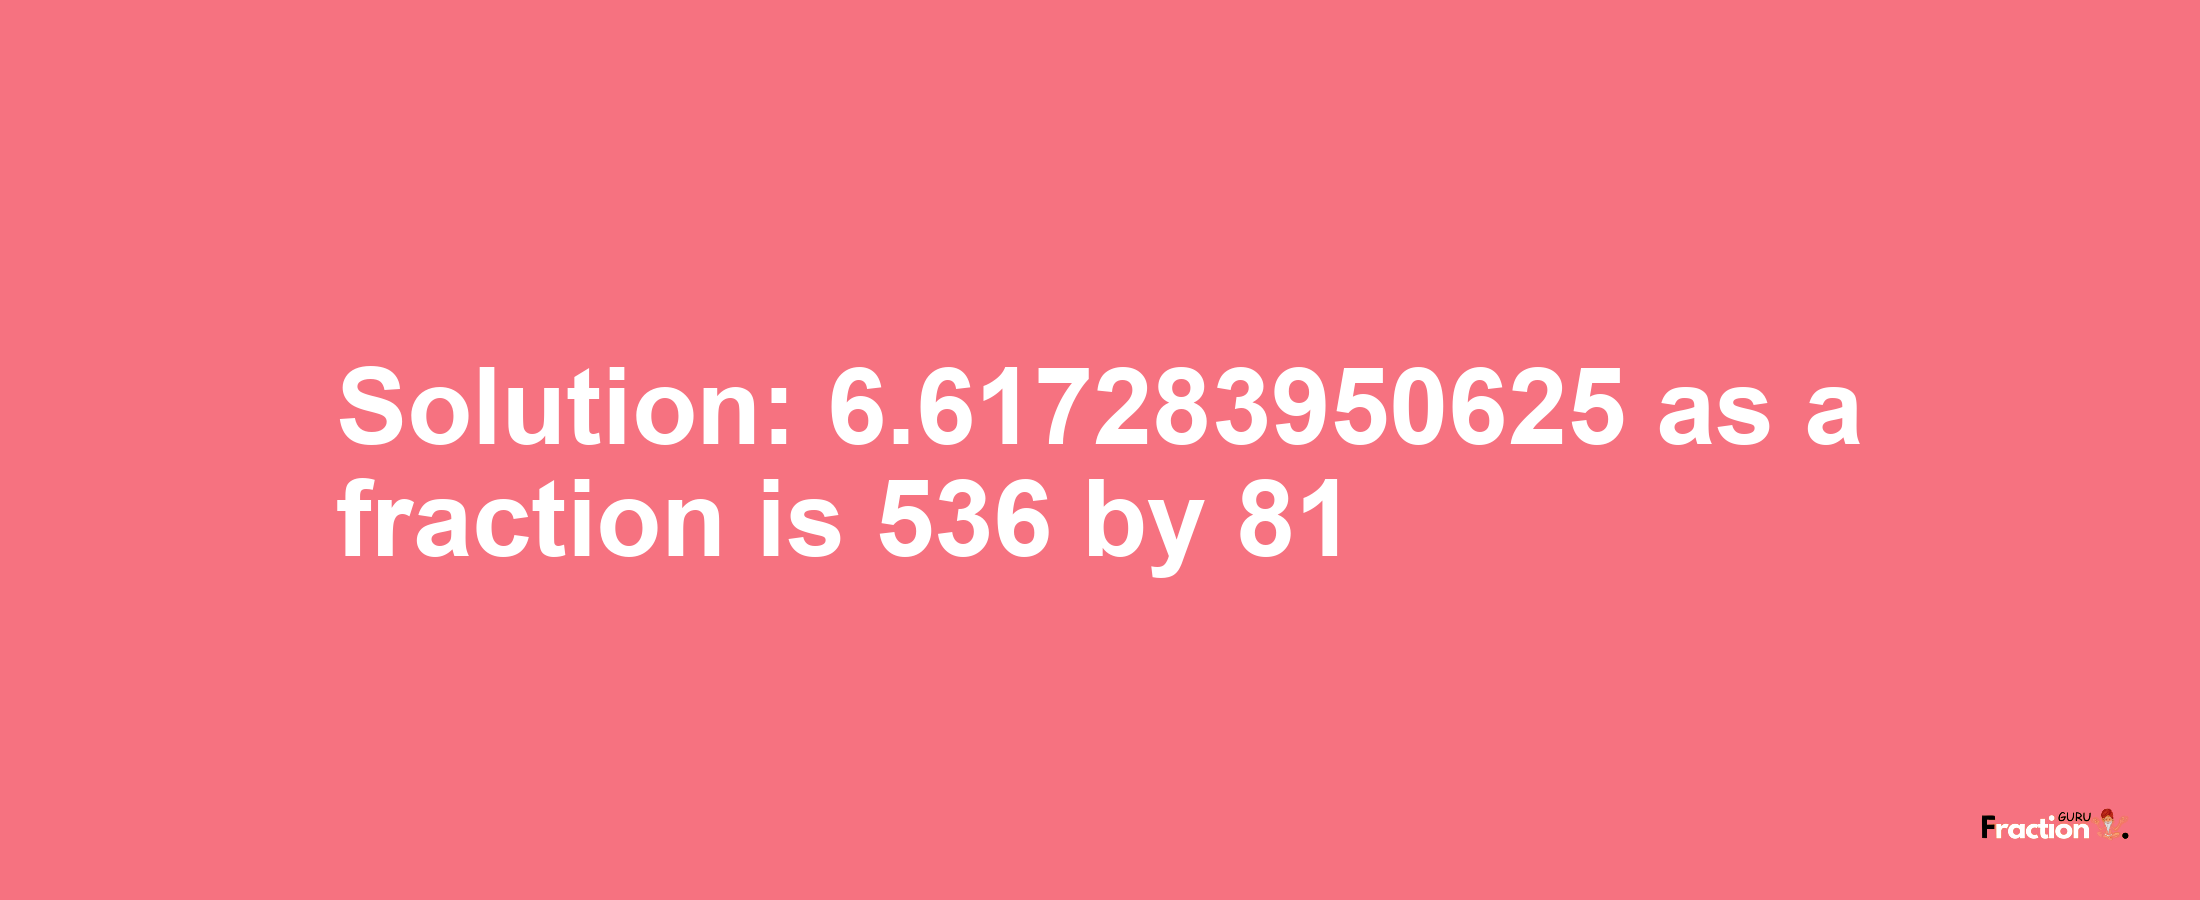 Solution:6.617283950625 as a fraction is 536/81